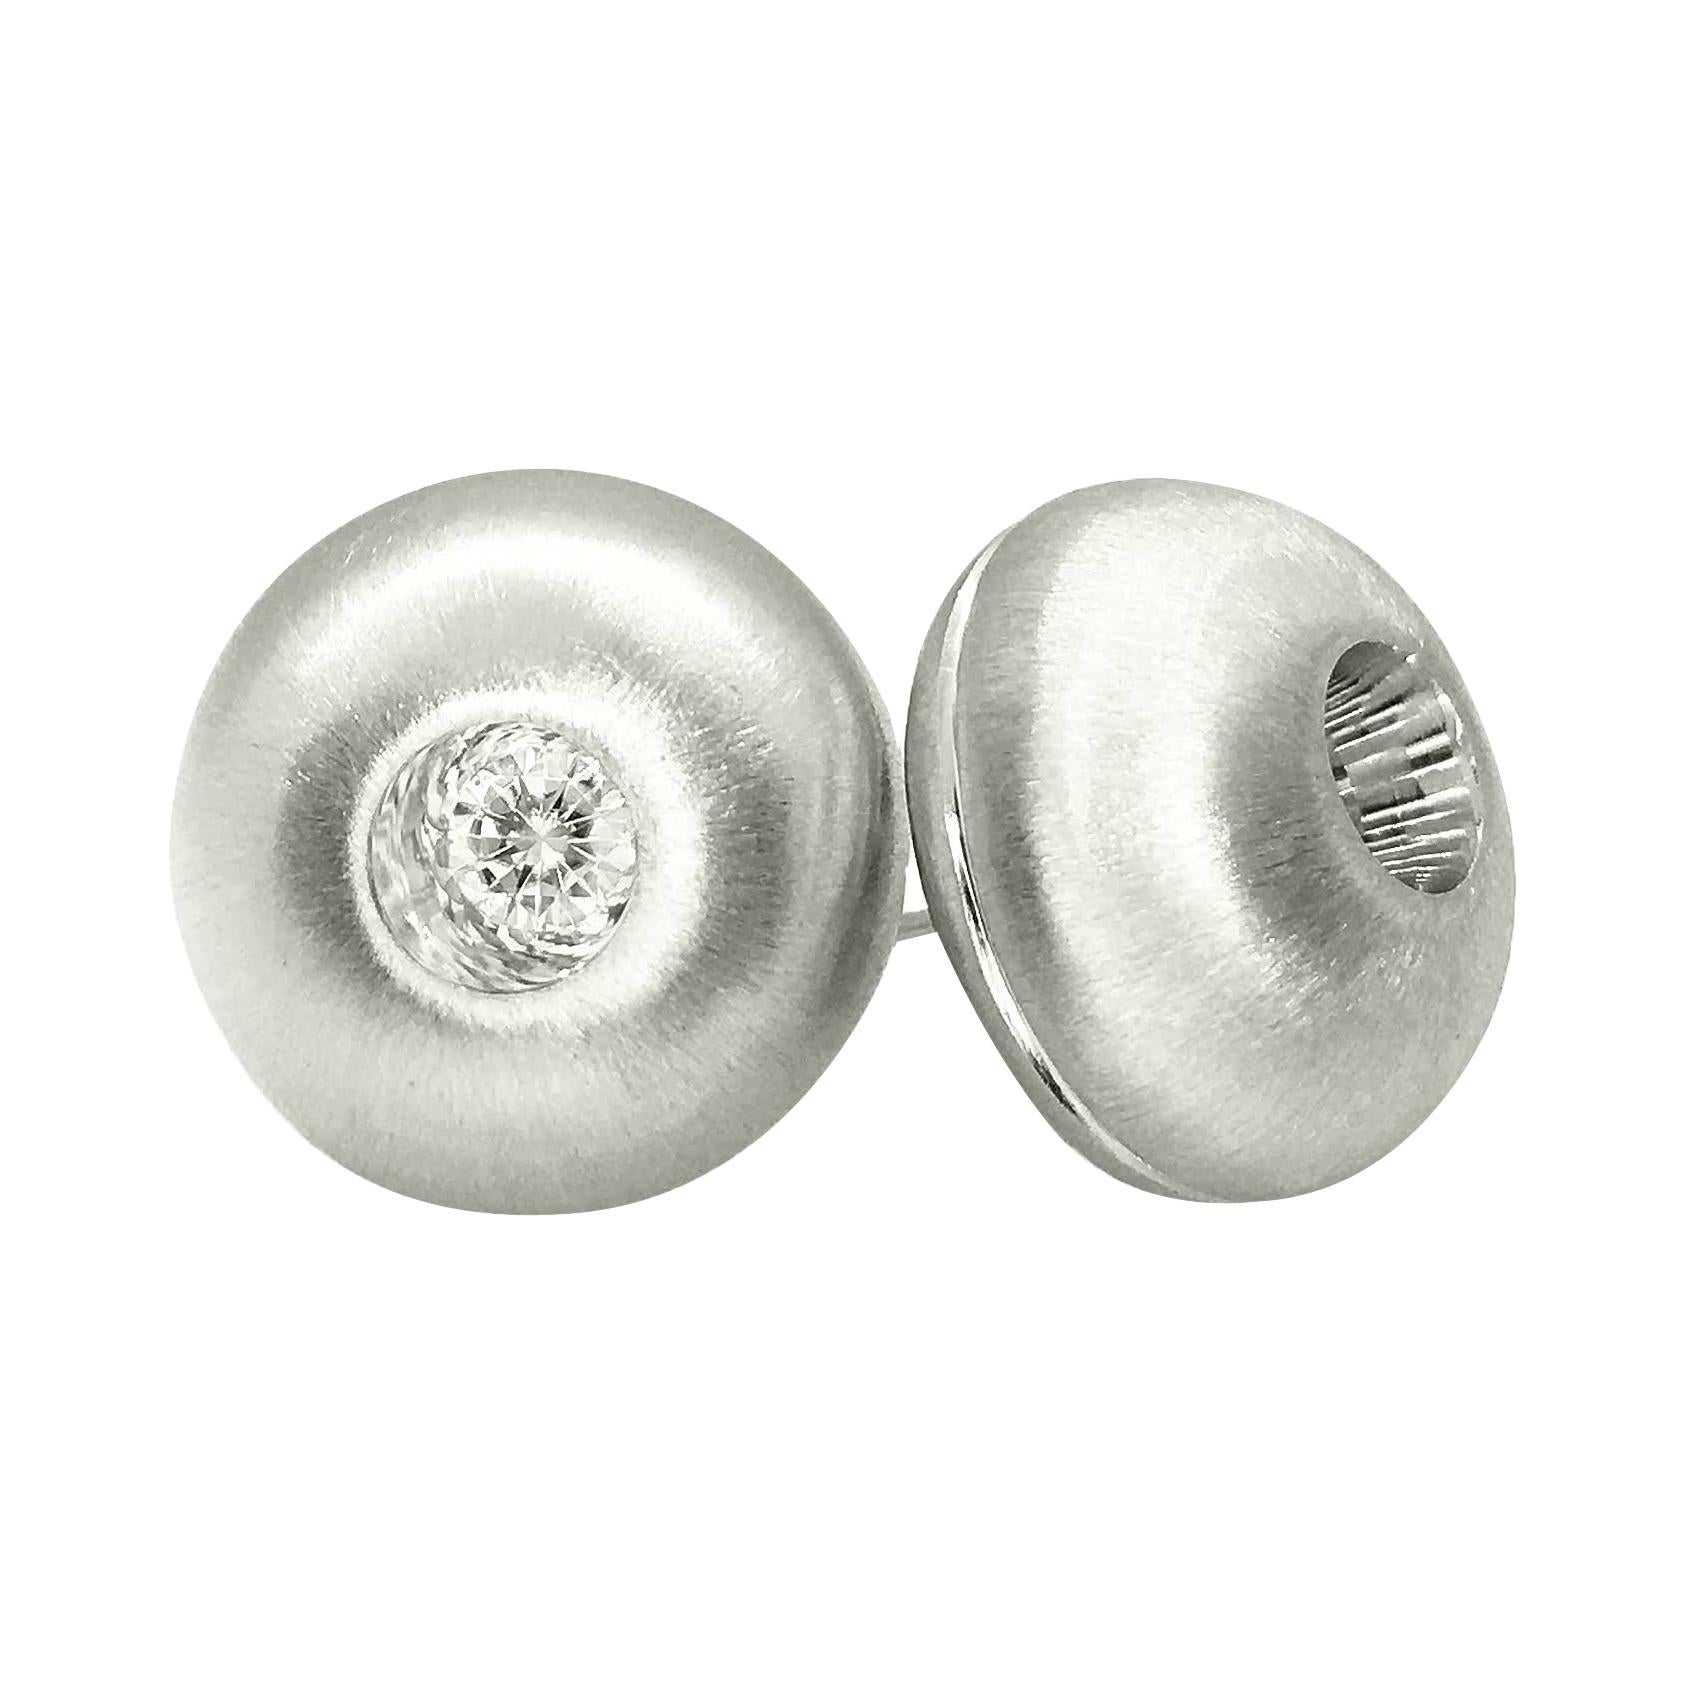 brushed finish handmade from scratch Round domed silver stud earrings sterling silver